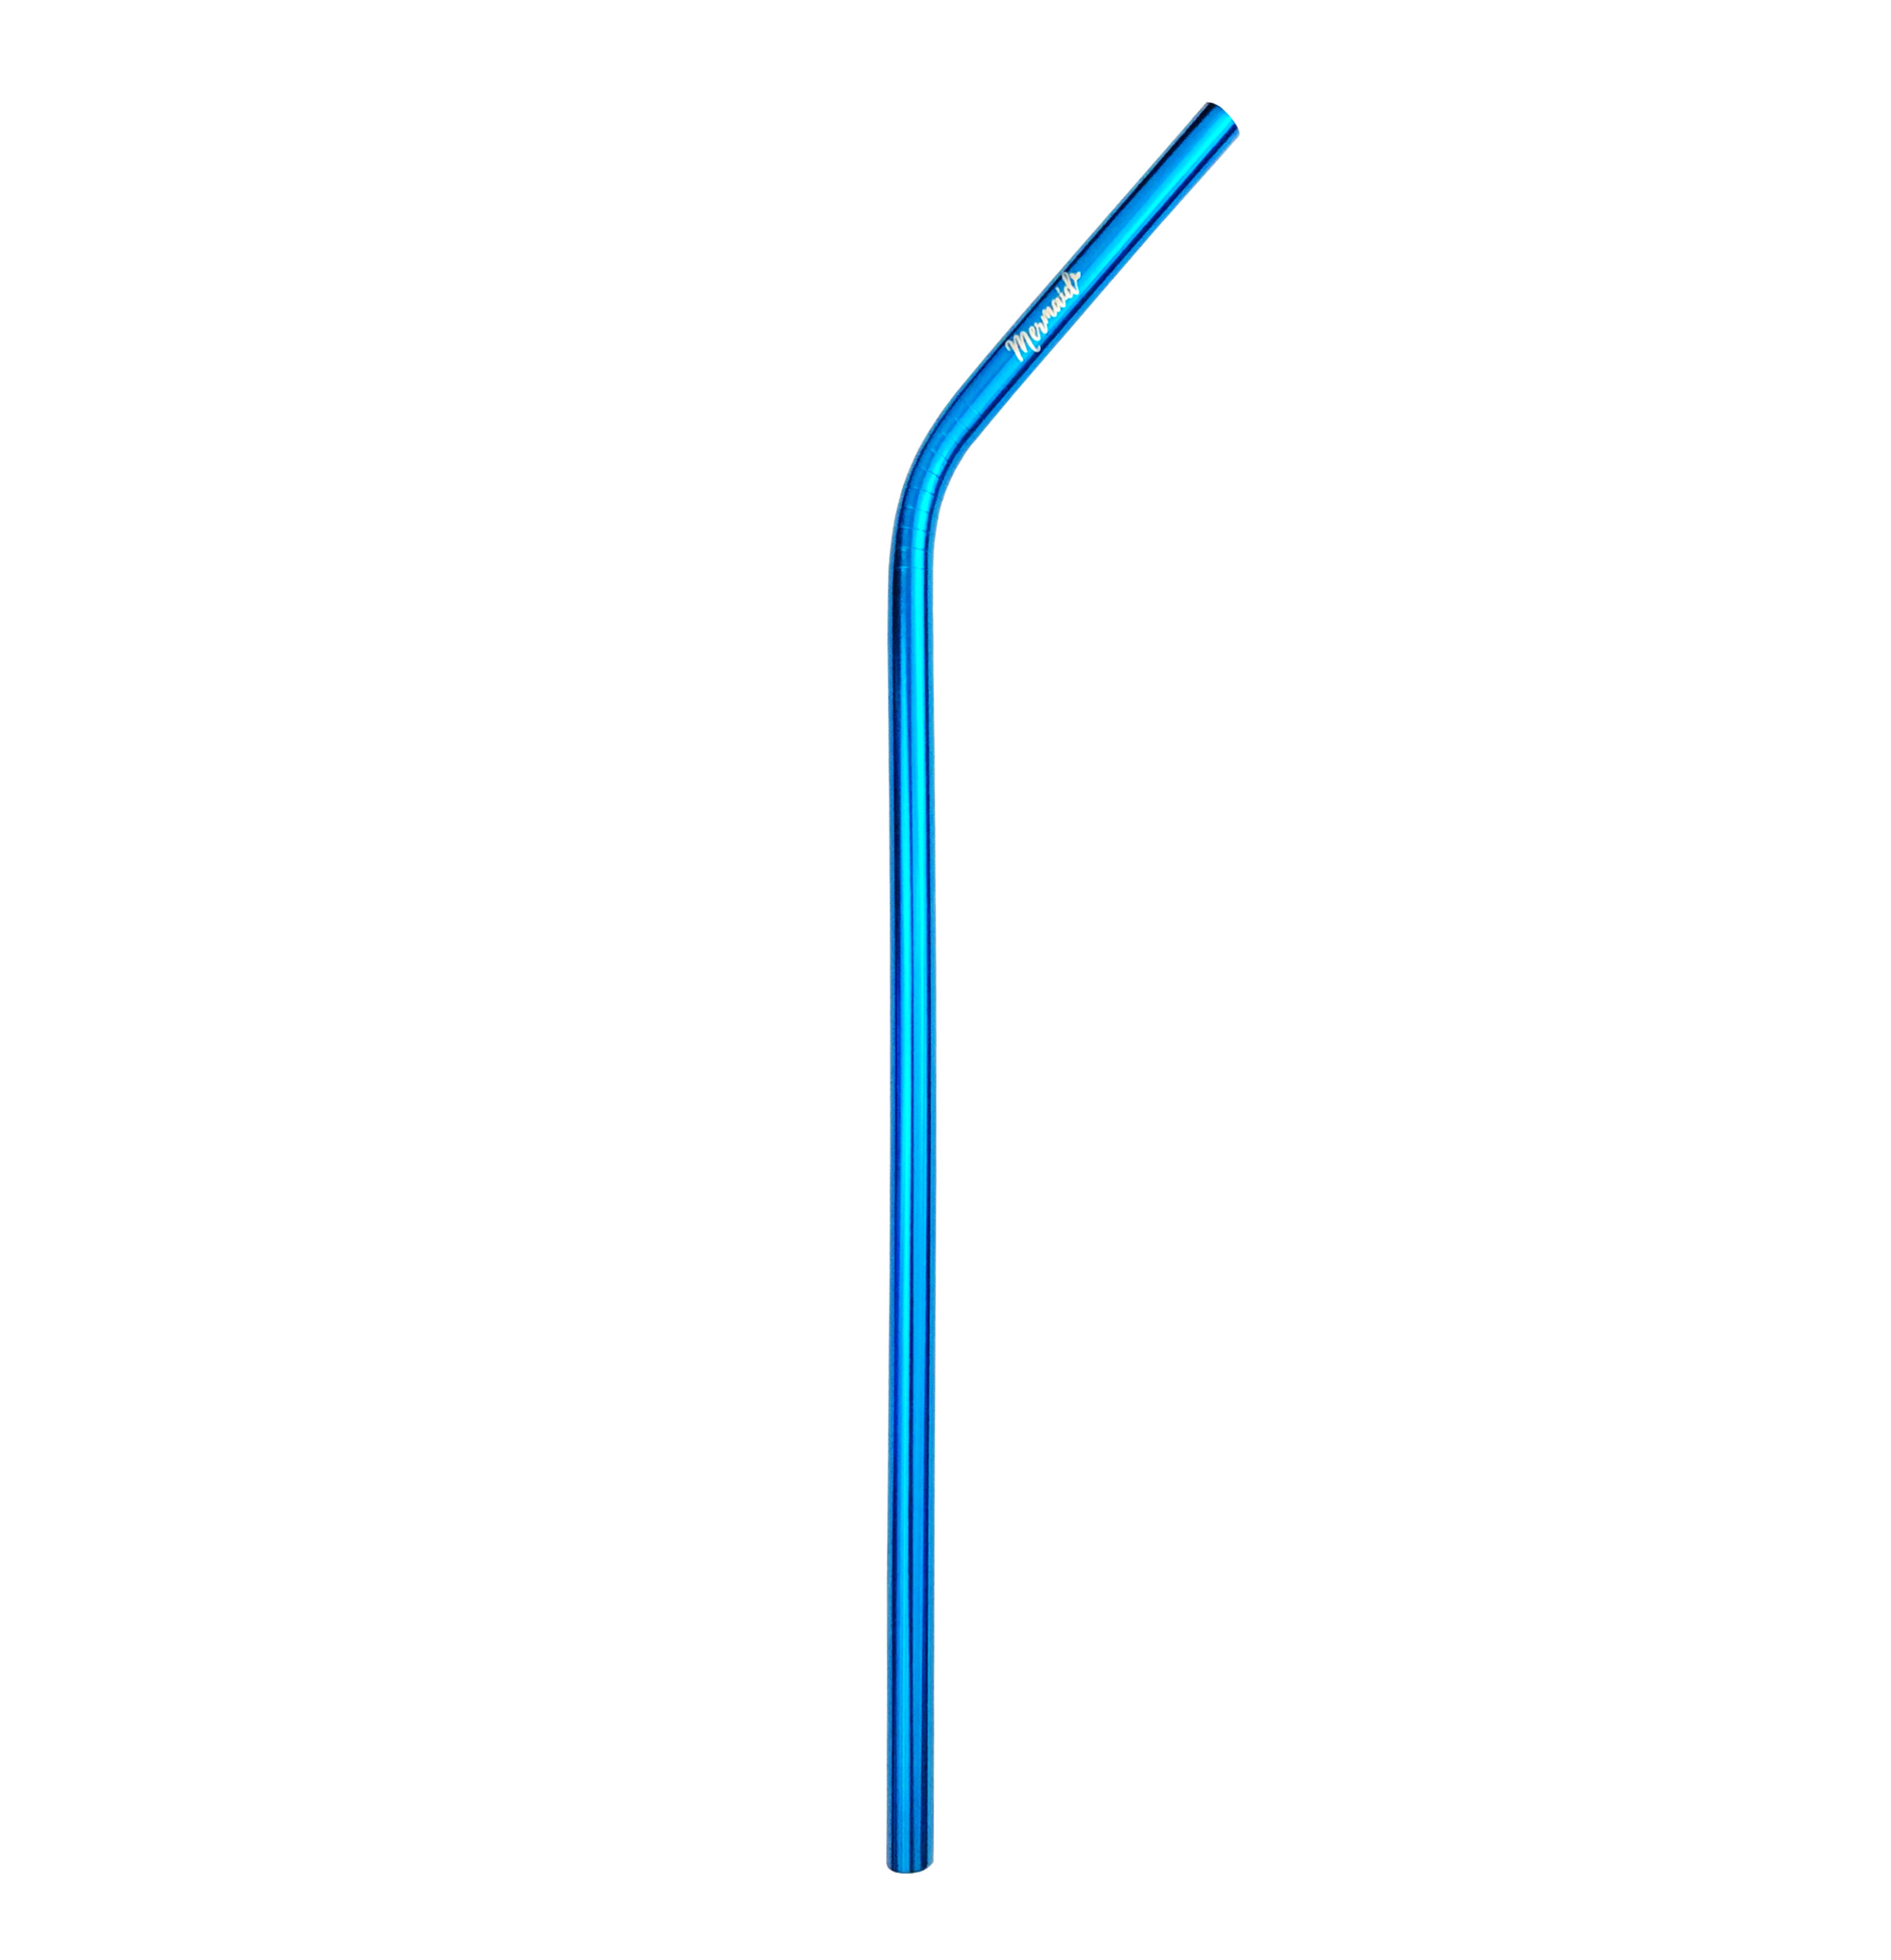 6mm Stainless Steel Straws